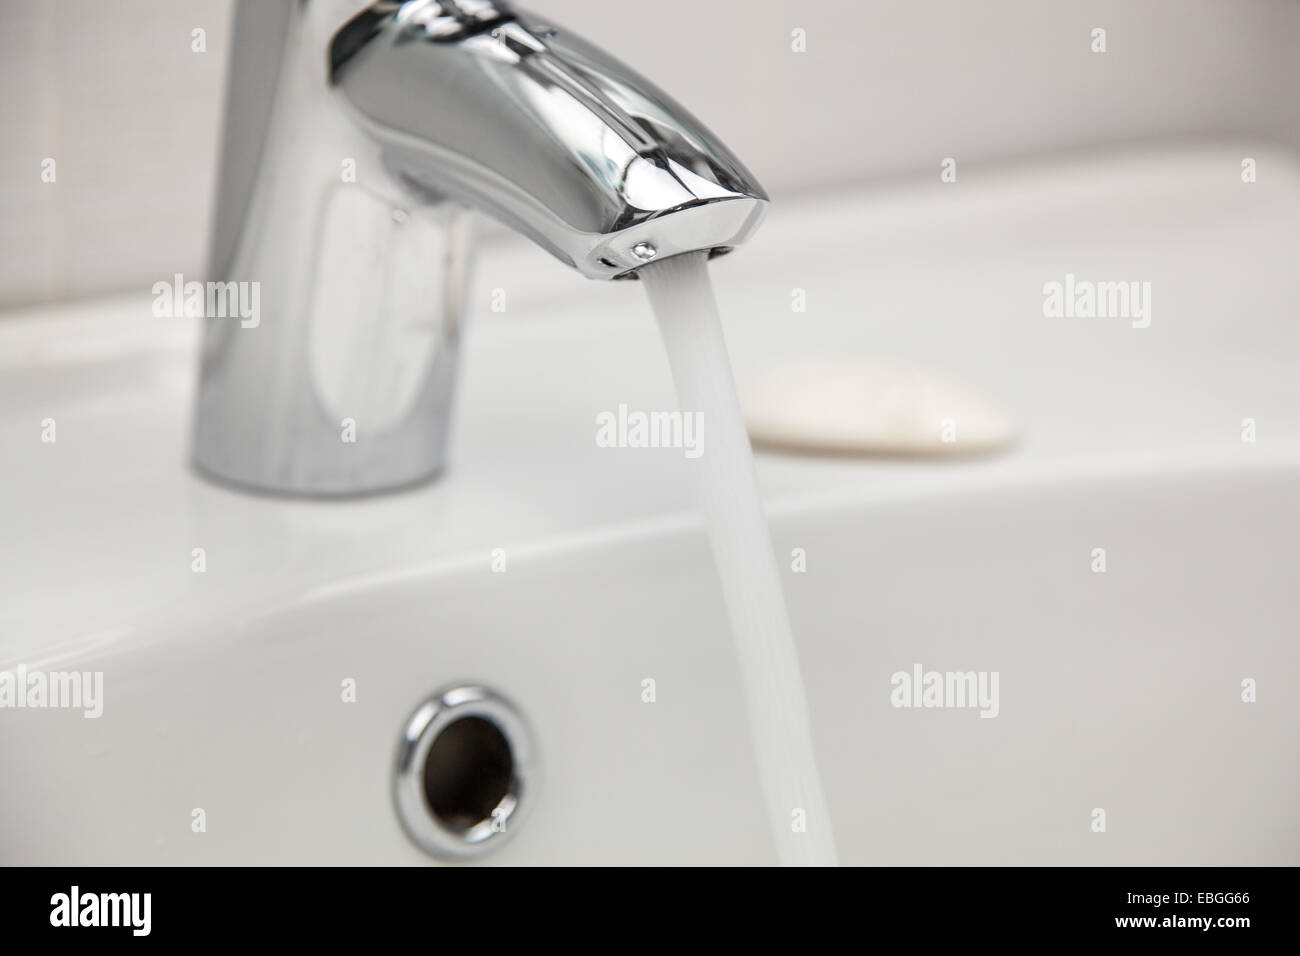 Water tap faucet with flowing water in a white bathroom sink. Stock Photo